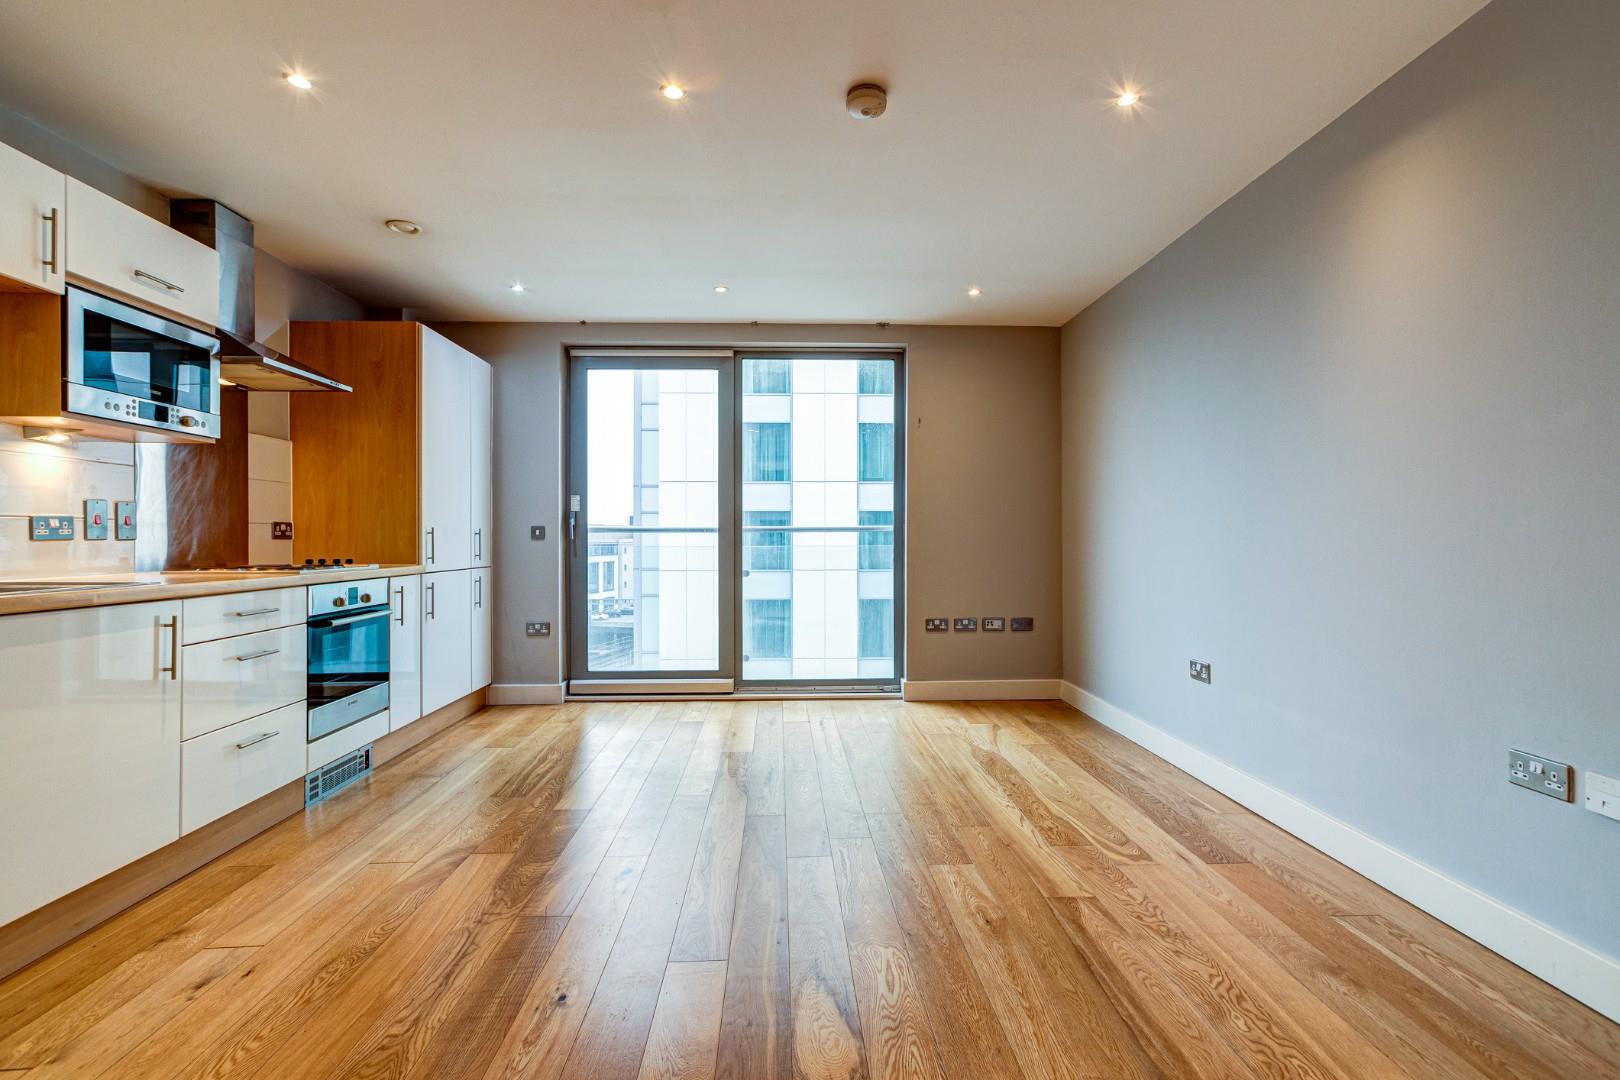 Apartment for sale in Bute Terrace, Cardiff - Property Image 1